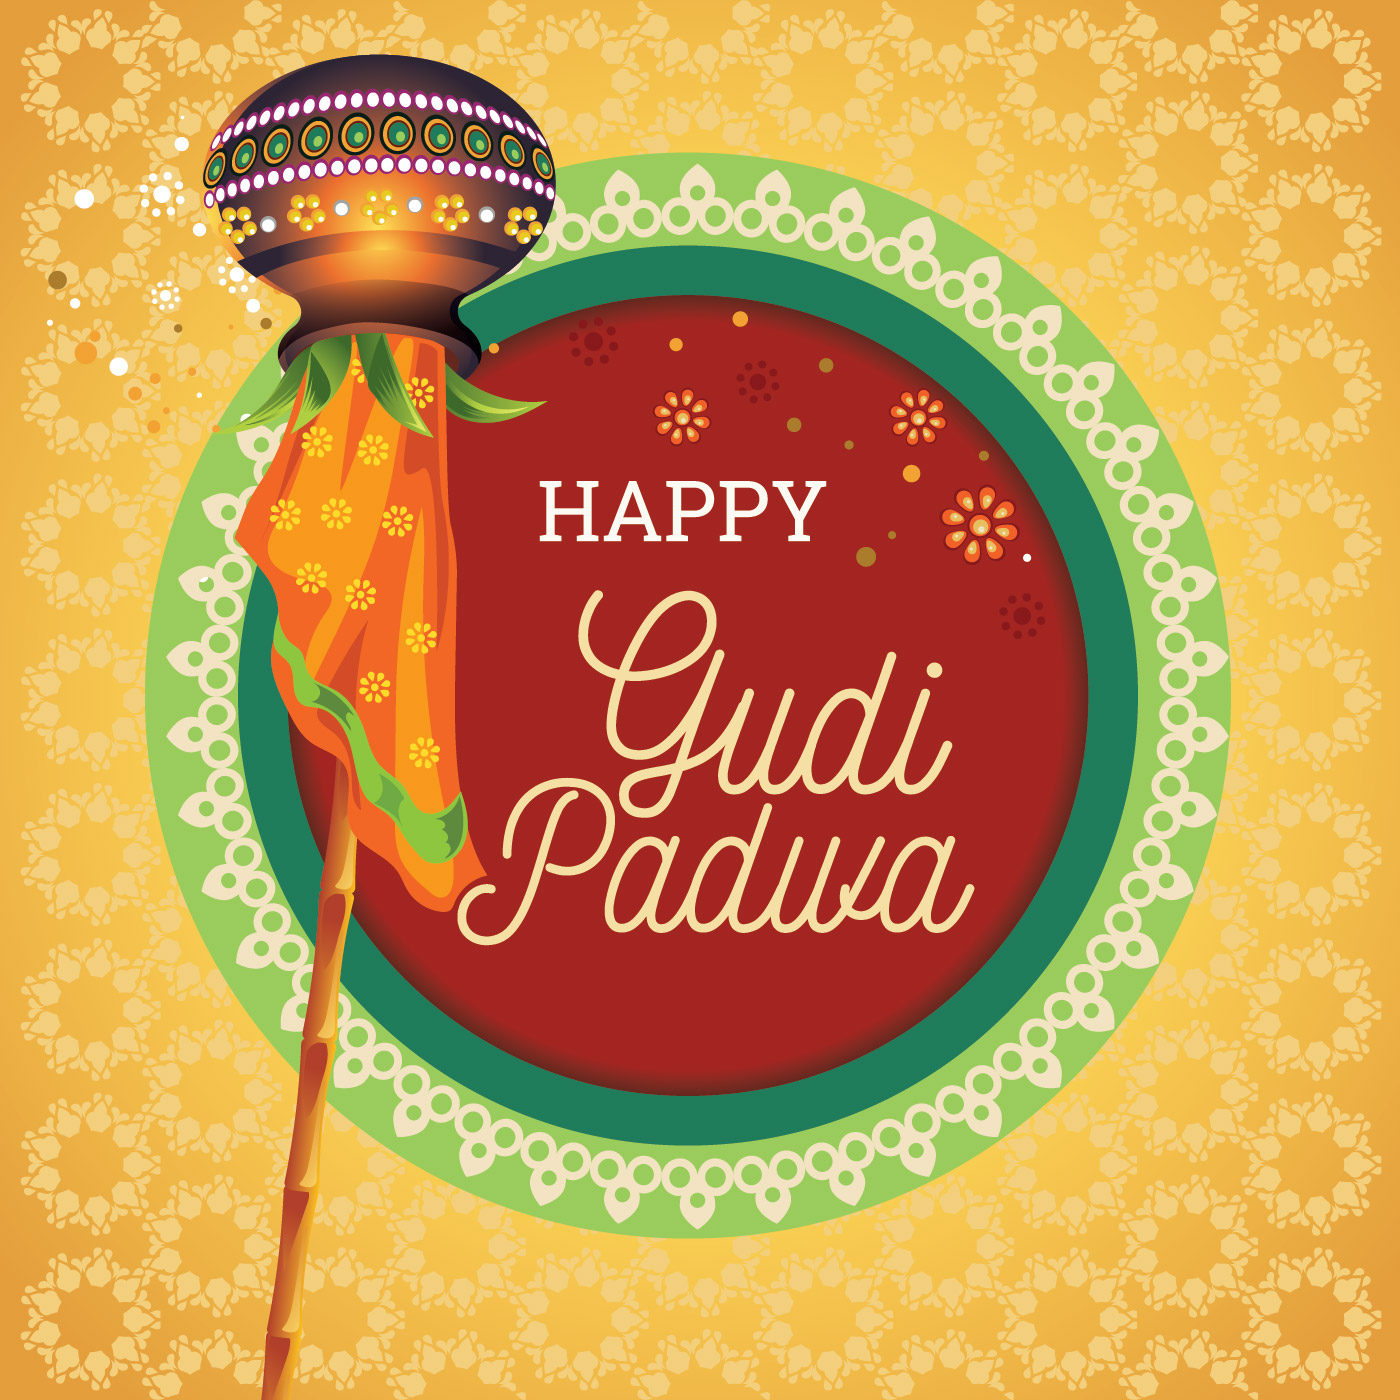 illustration with decorated background of gudi padwa lunar new year celebration of india download free vectors clipart graphics vector art